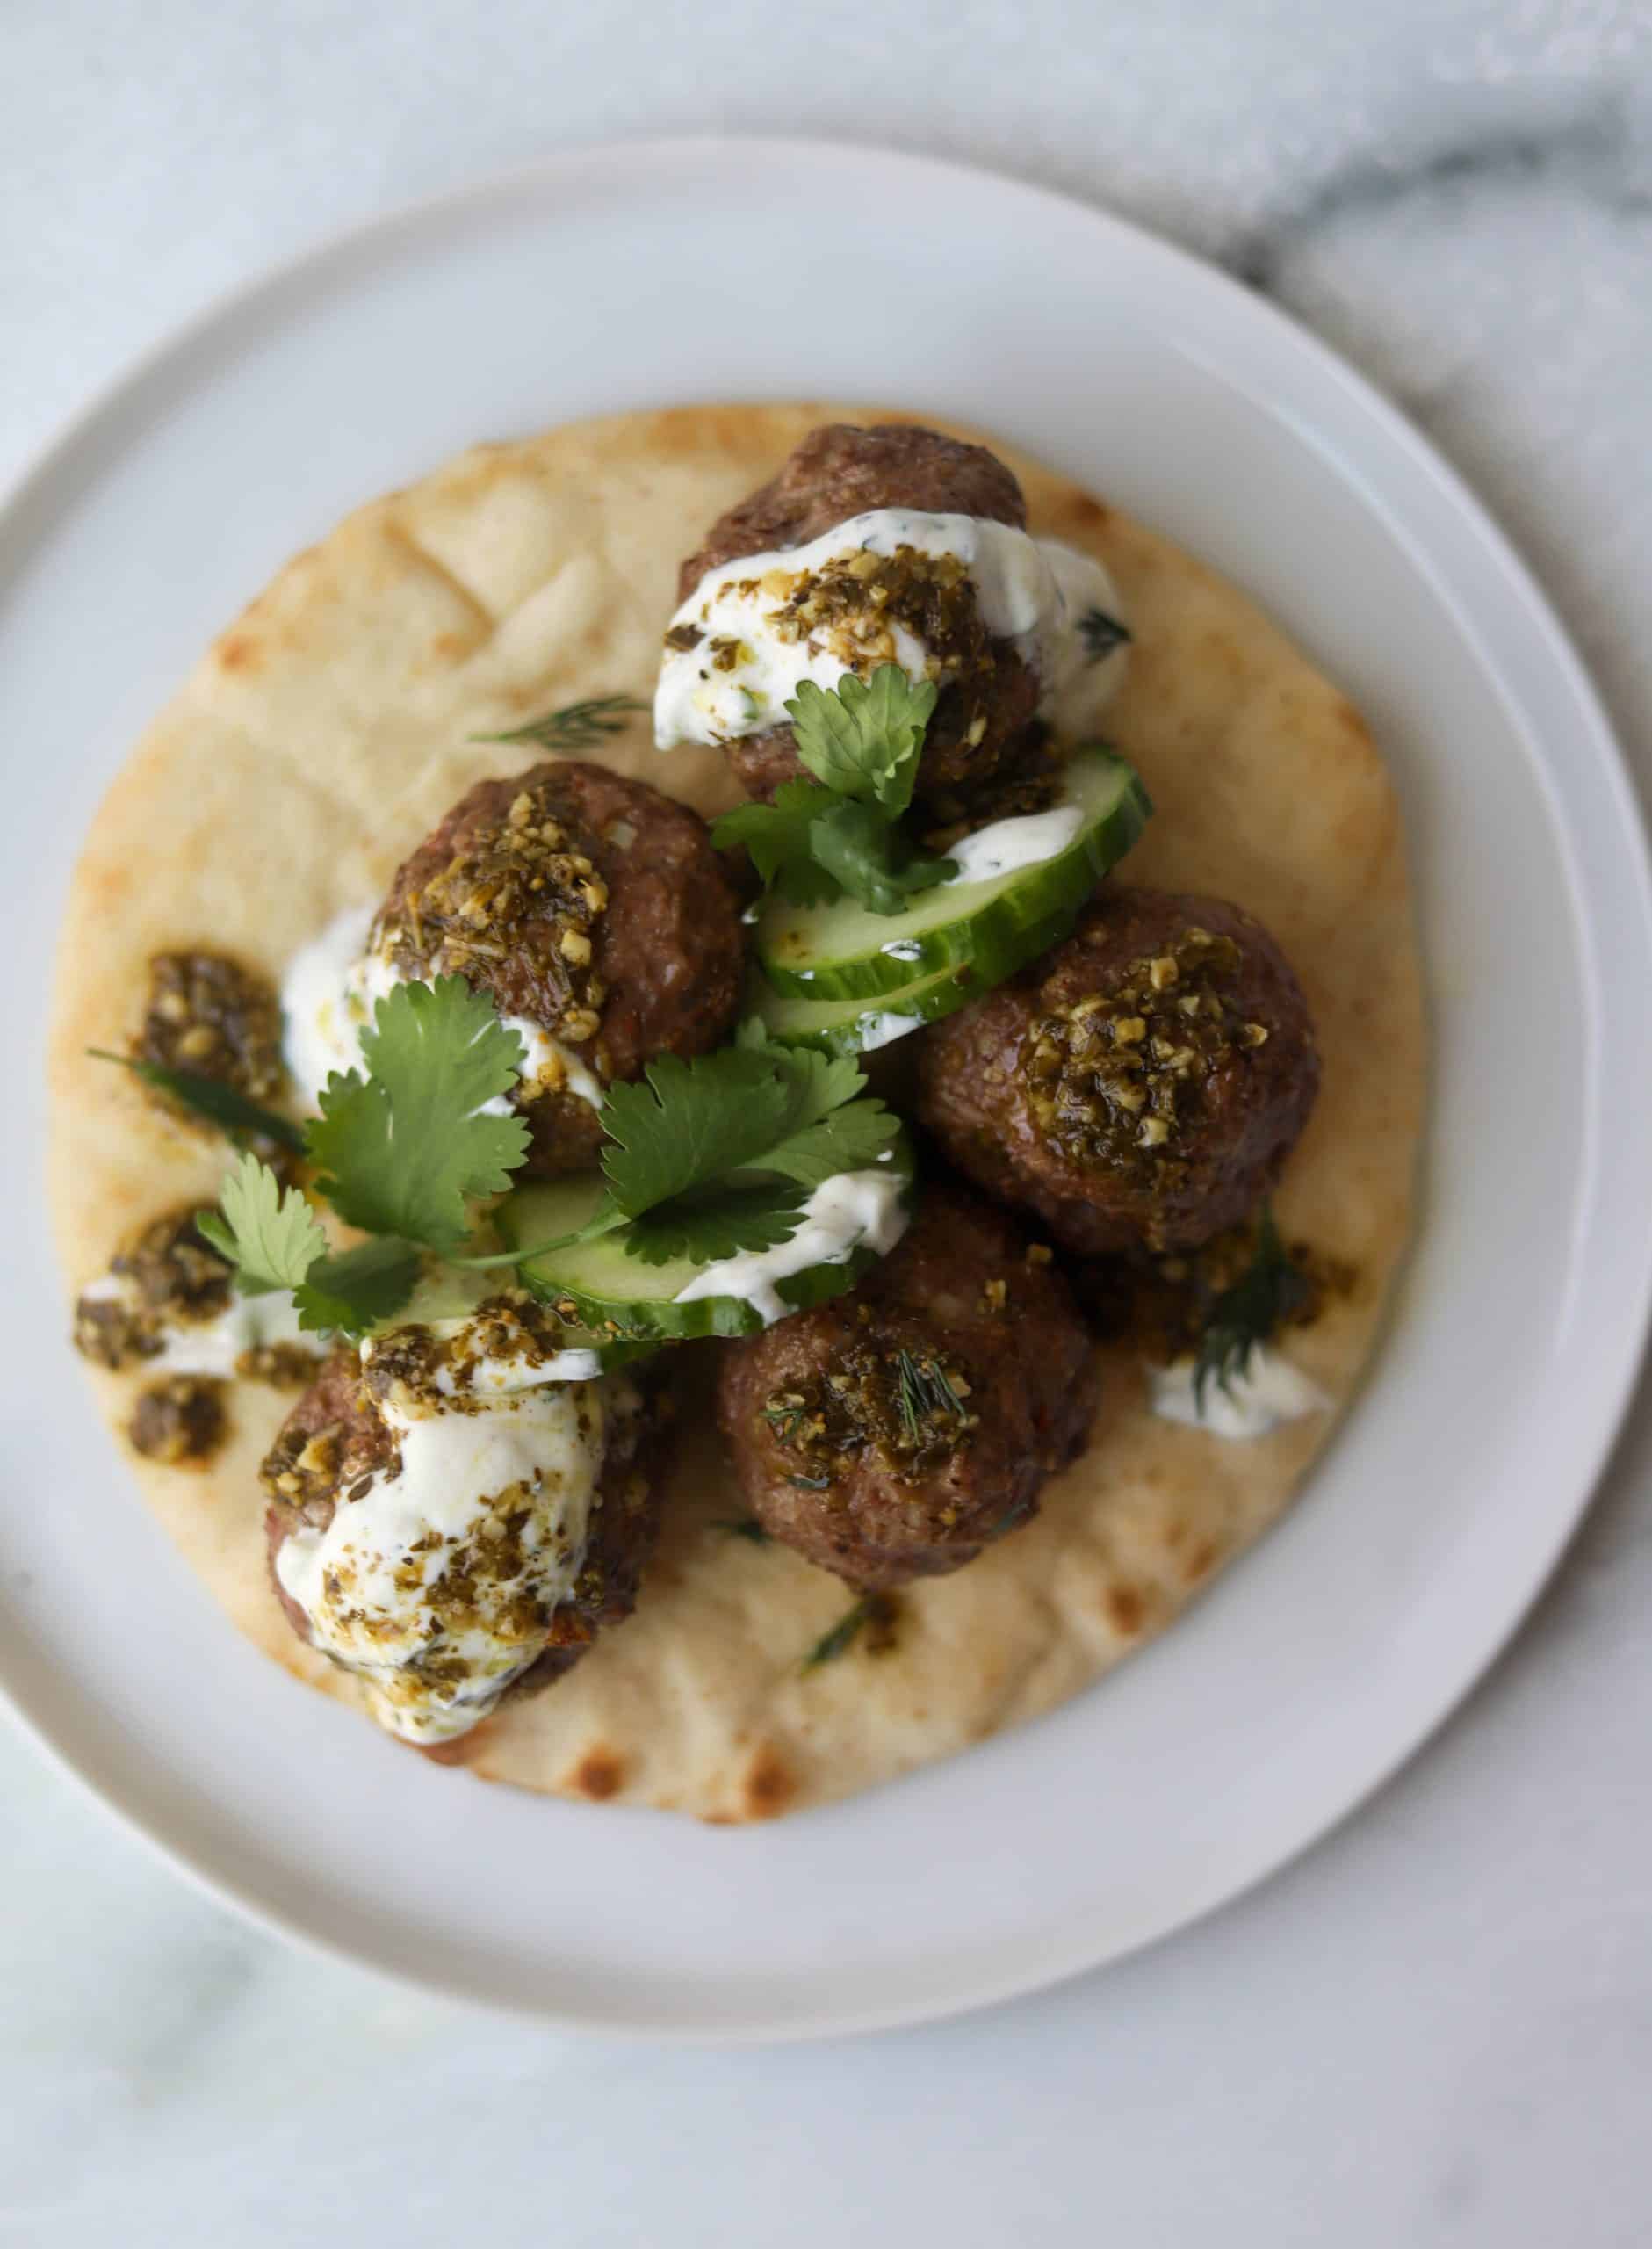 Greek lamb meatballs on top of a pita, topped with cucumbers, dill, parsley, pesto, and tzatziki sauce.